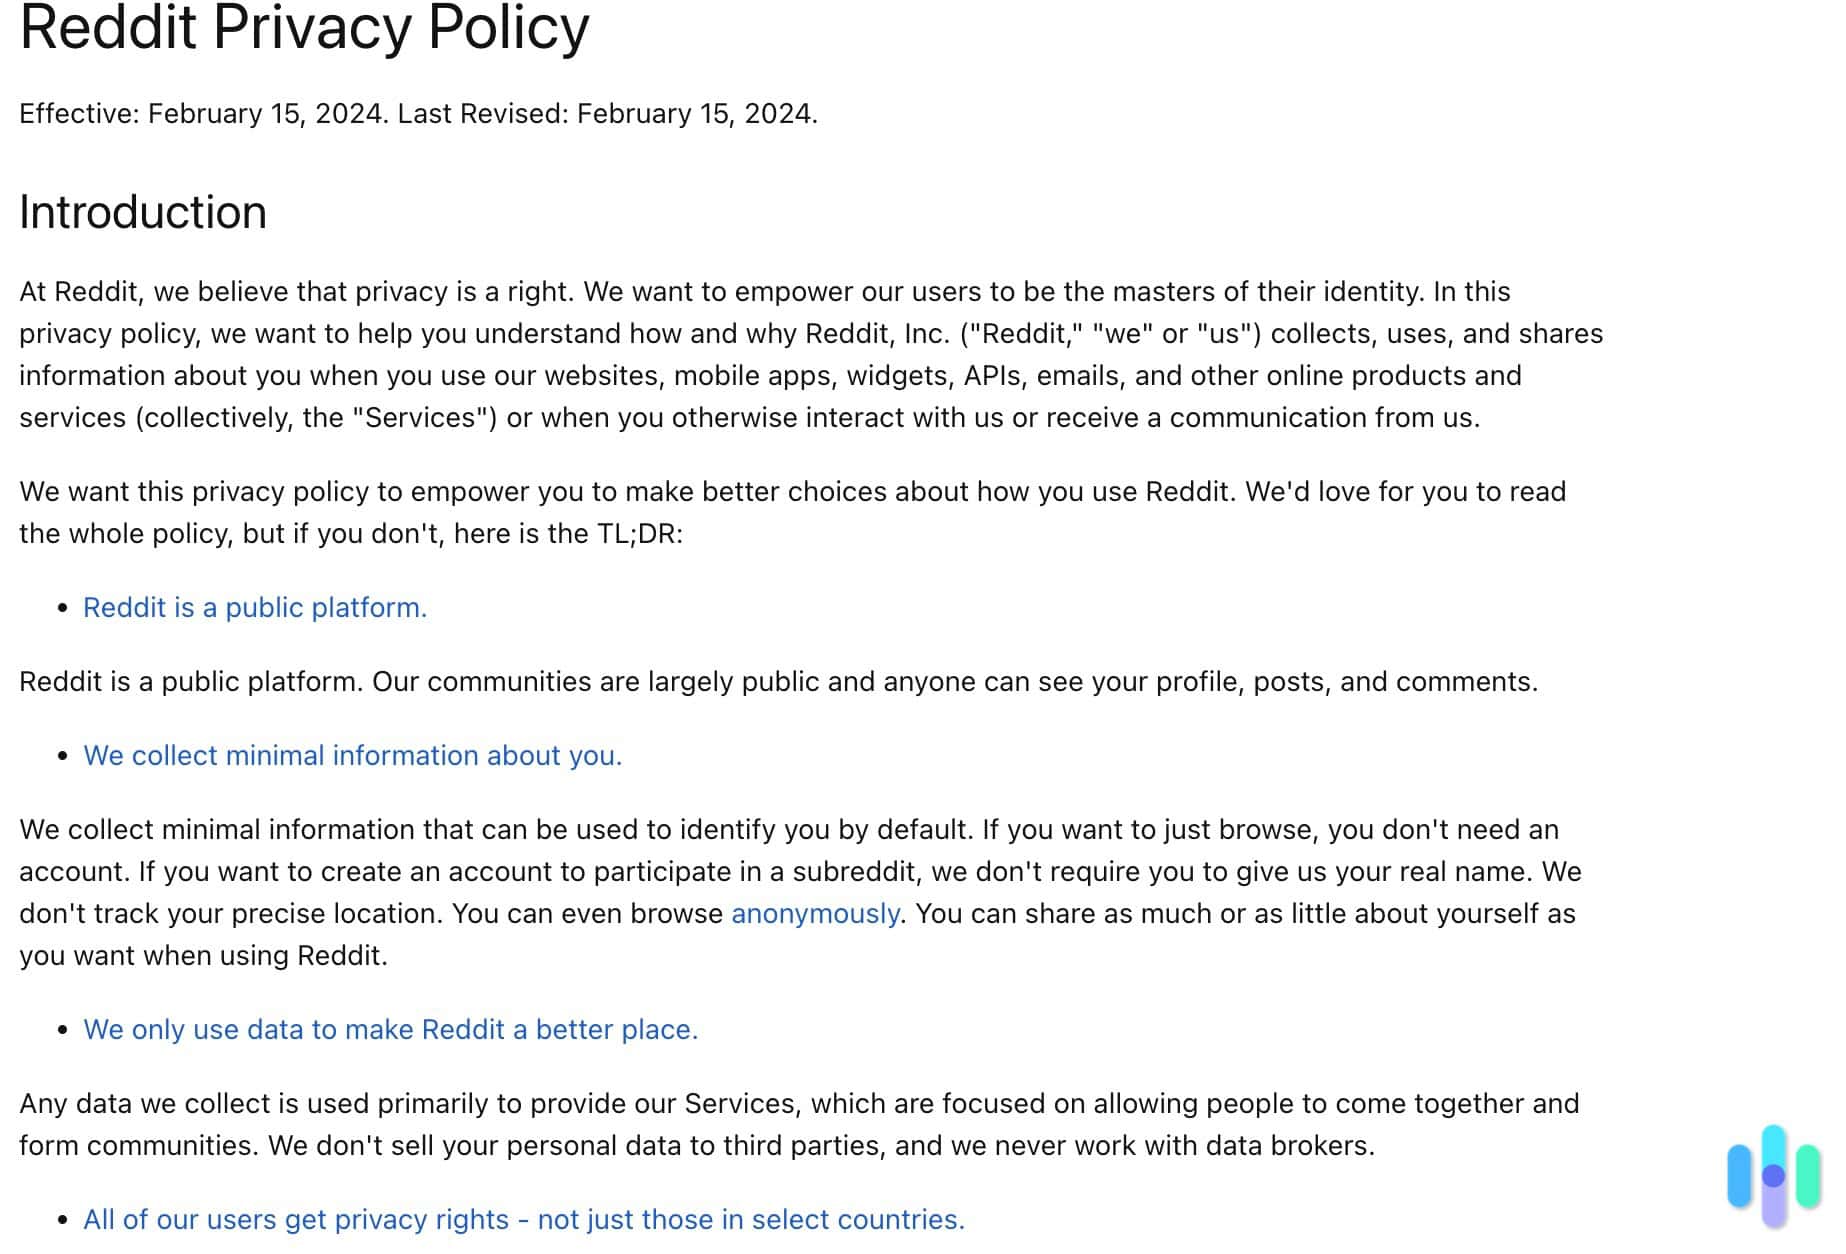 Preview of Reddit's Privacy Policy